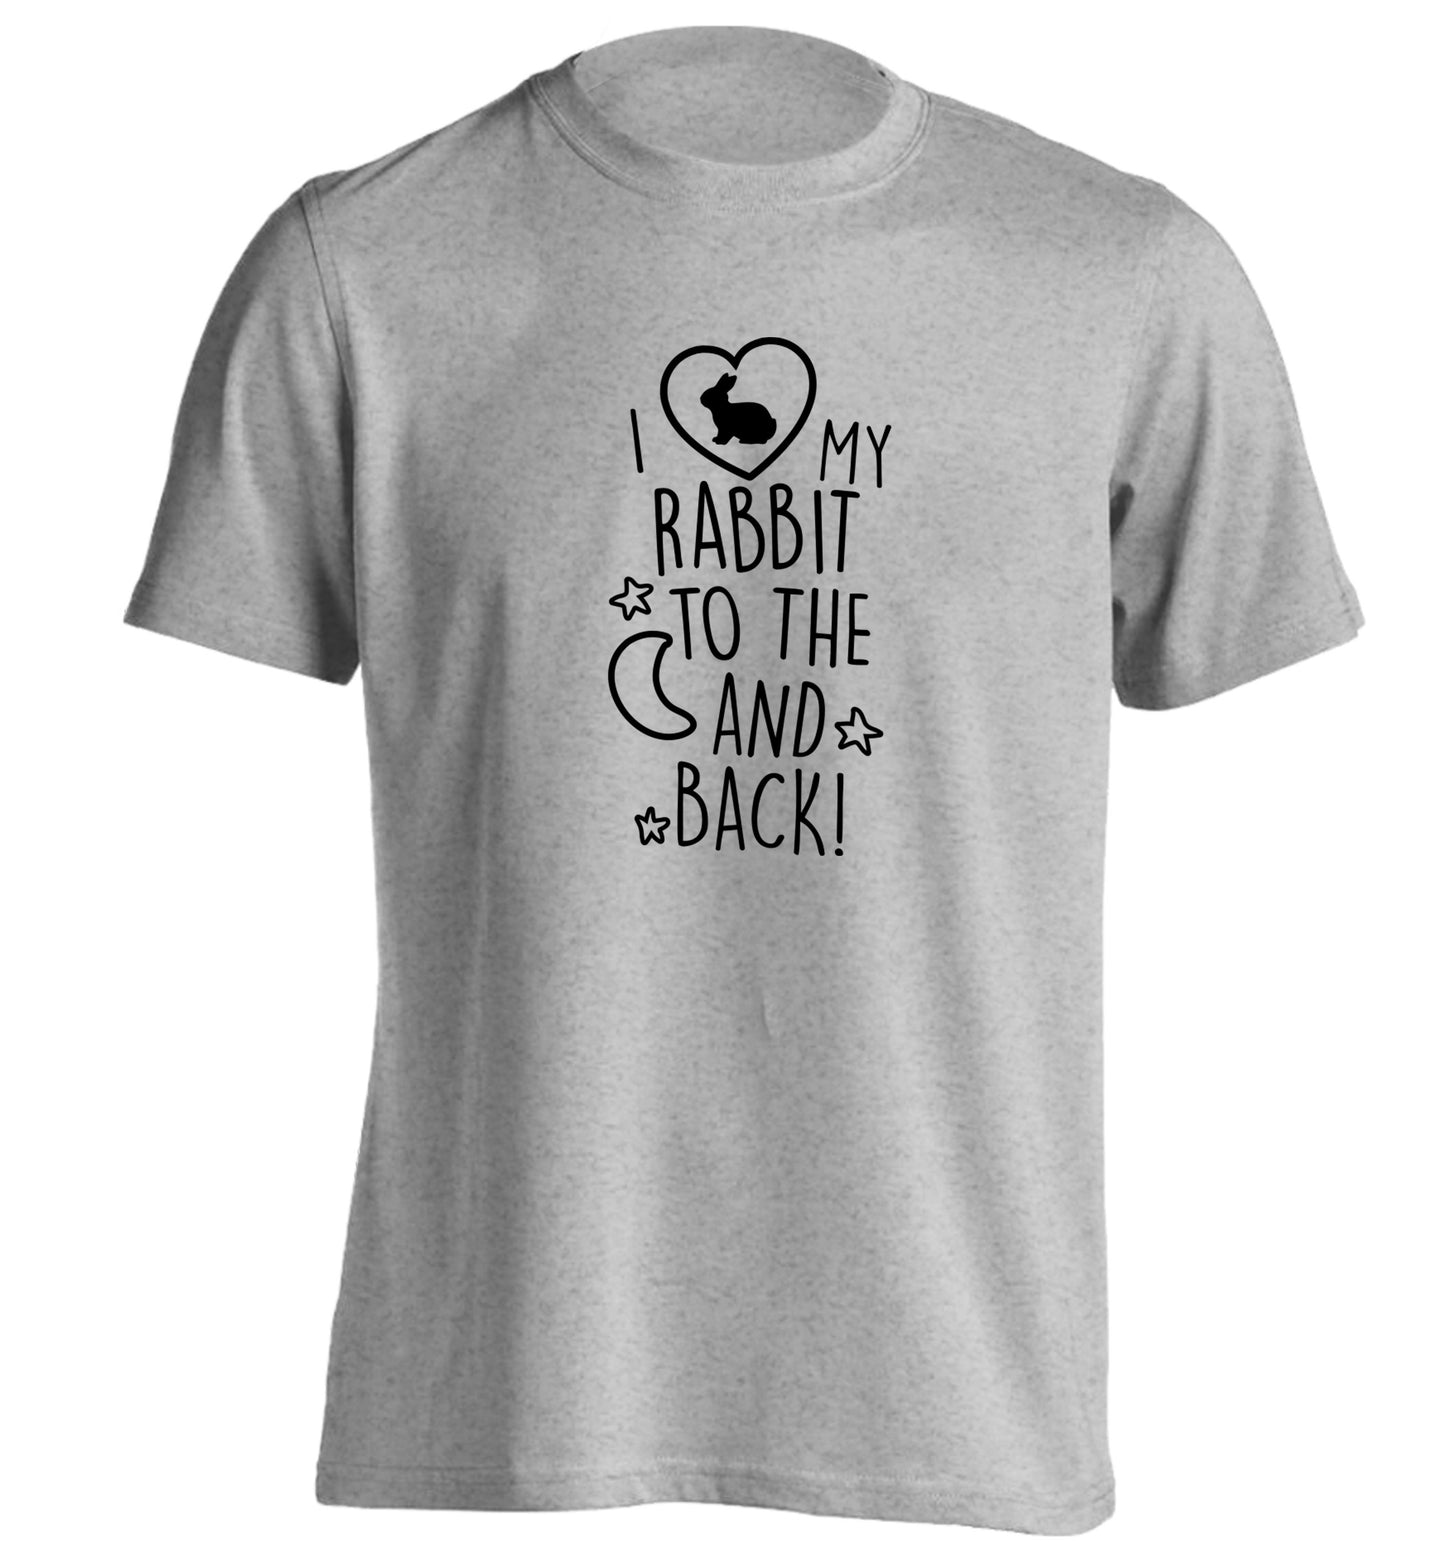 I love my rabbit to the moon and back adults unisex grey Tshirt 2XL